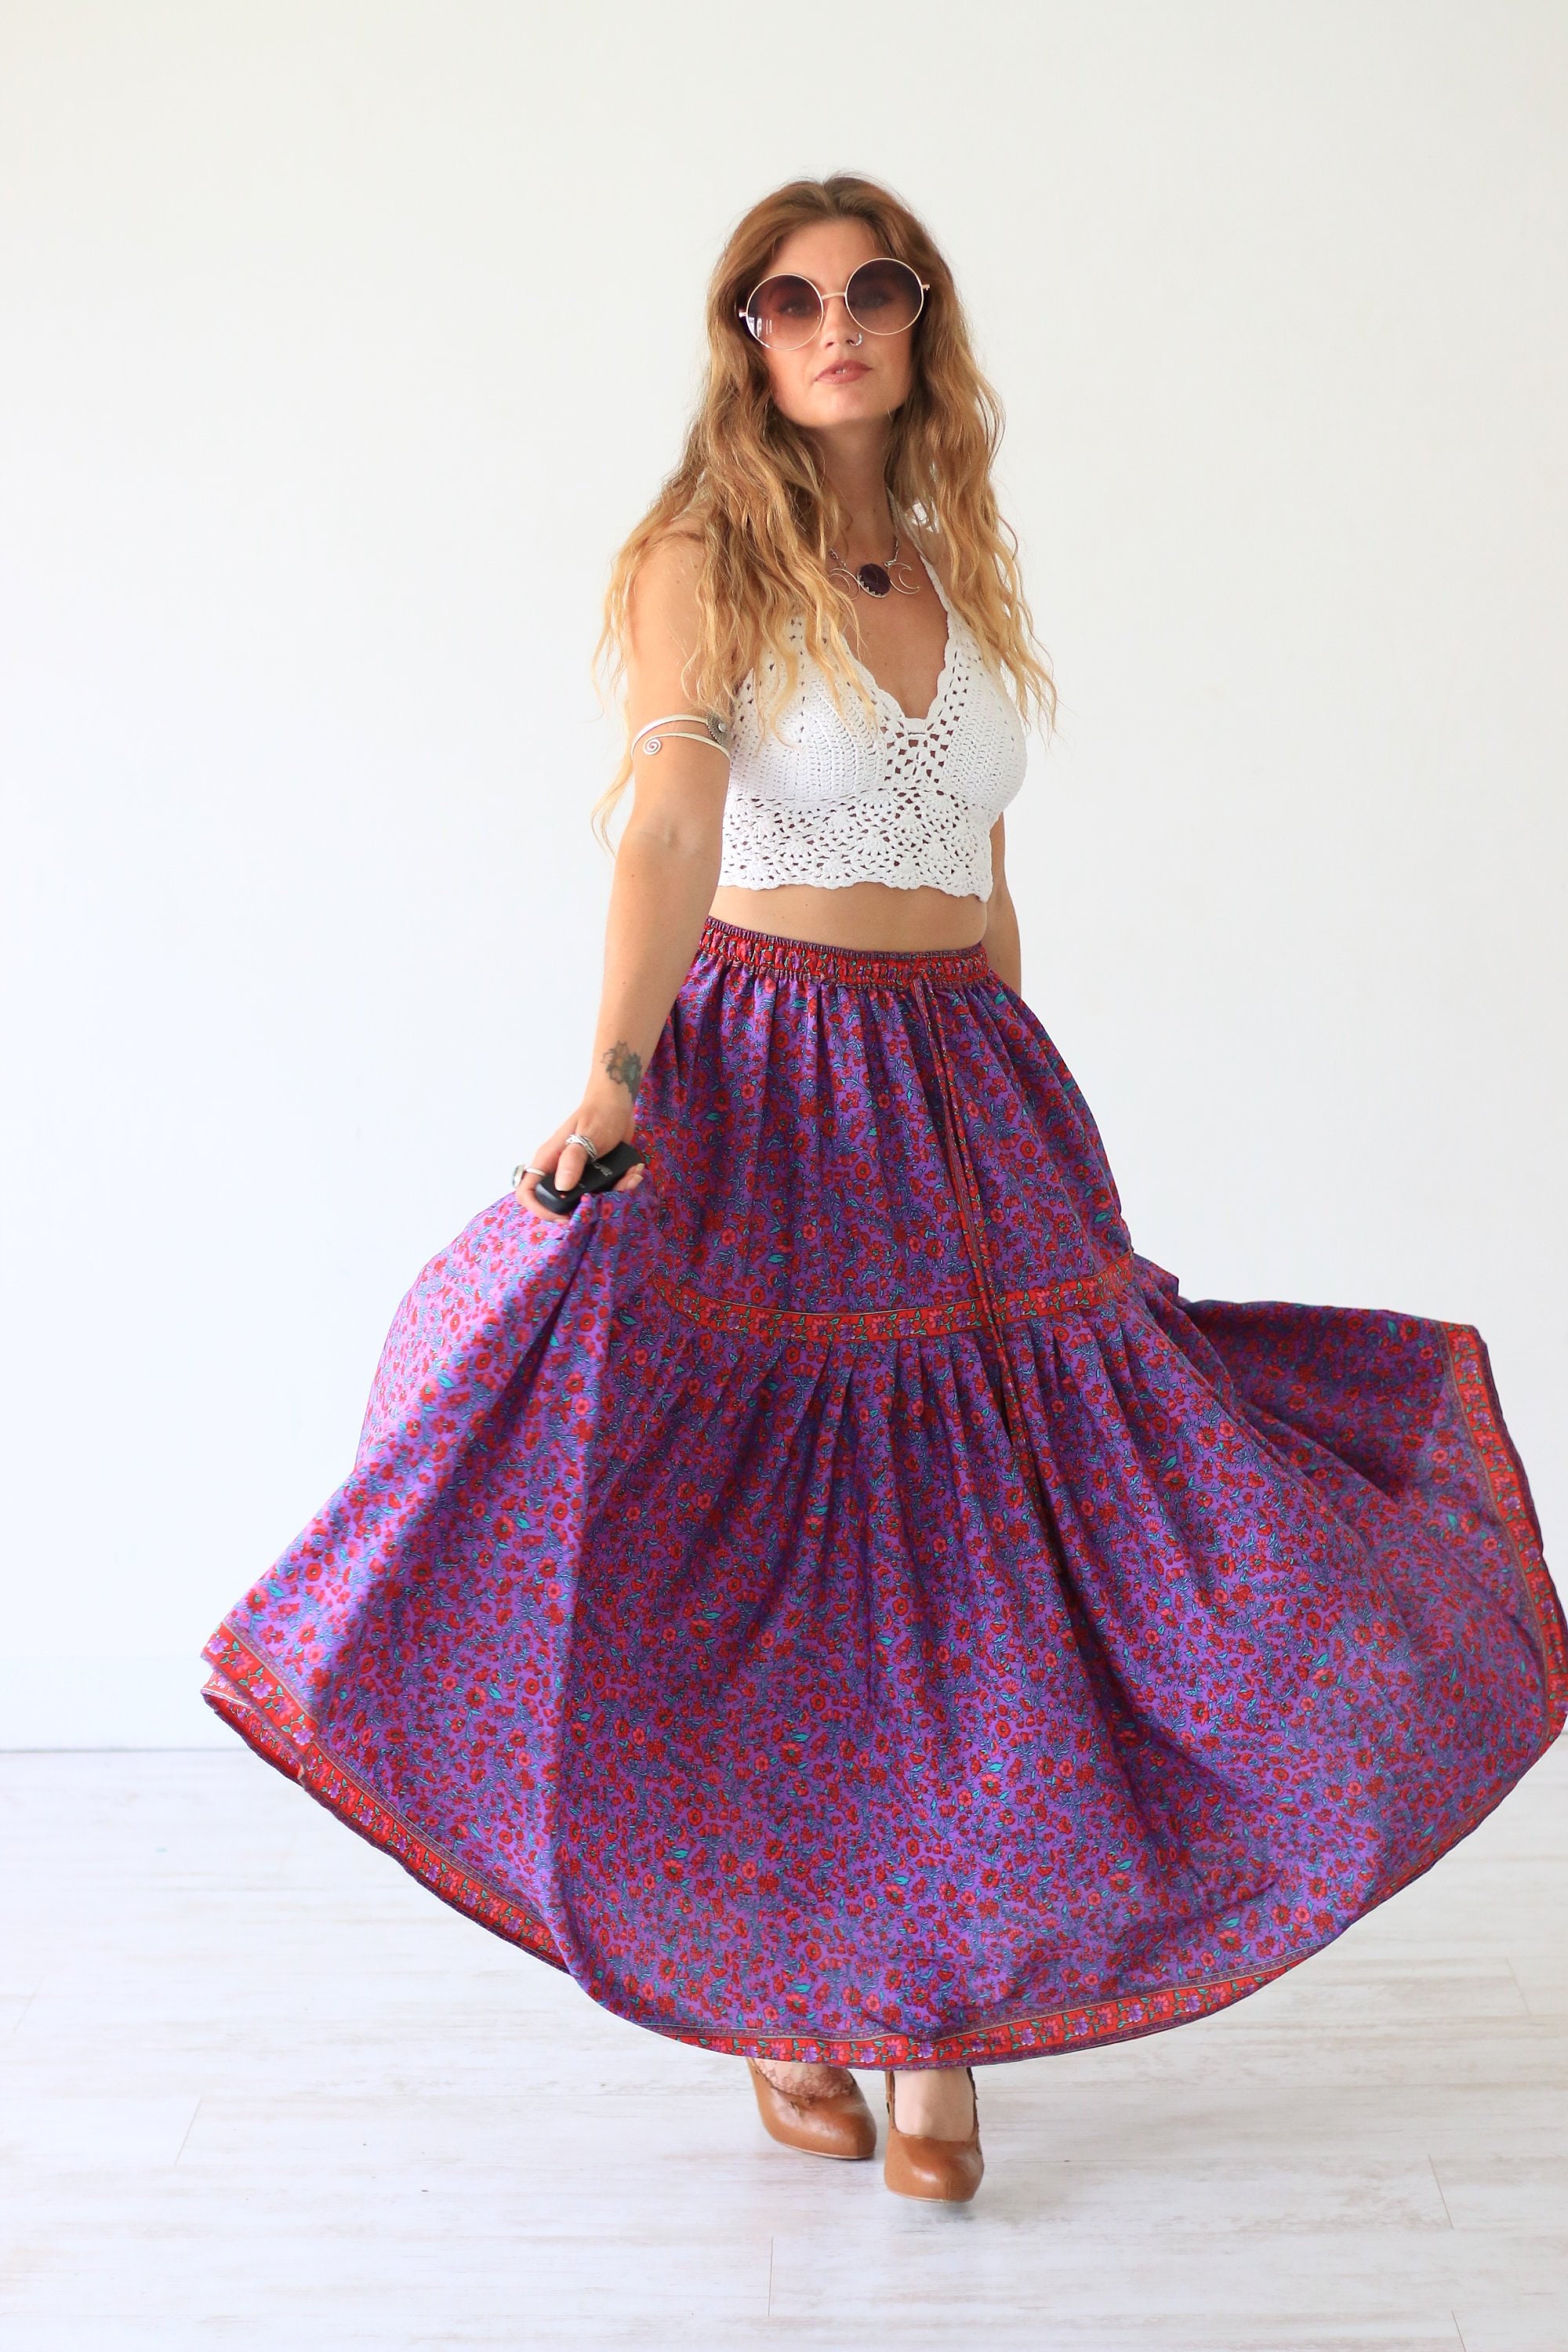 PASTEL PEASANT SKIRT - Vintage Style Gypsy skirt - 60's 70's Maxi ...